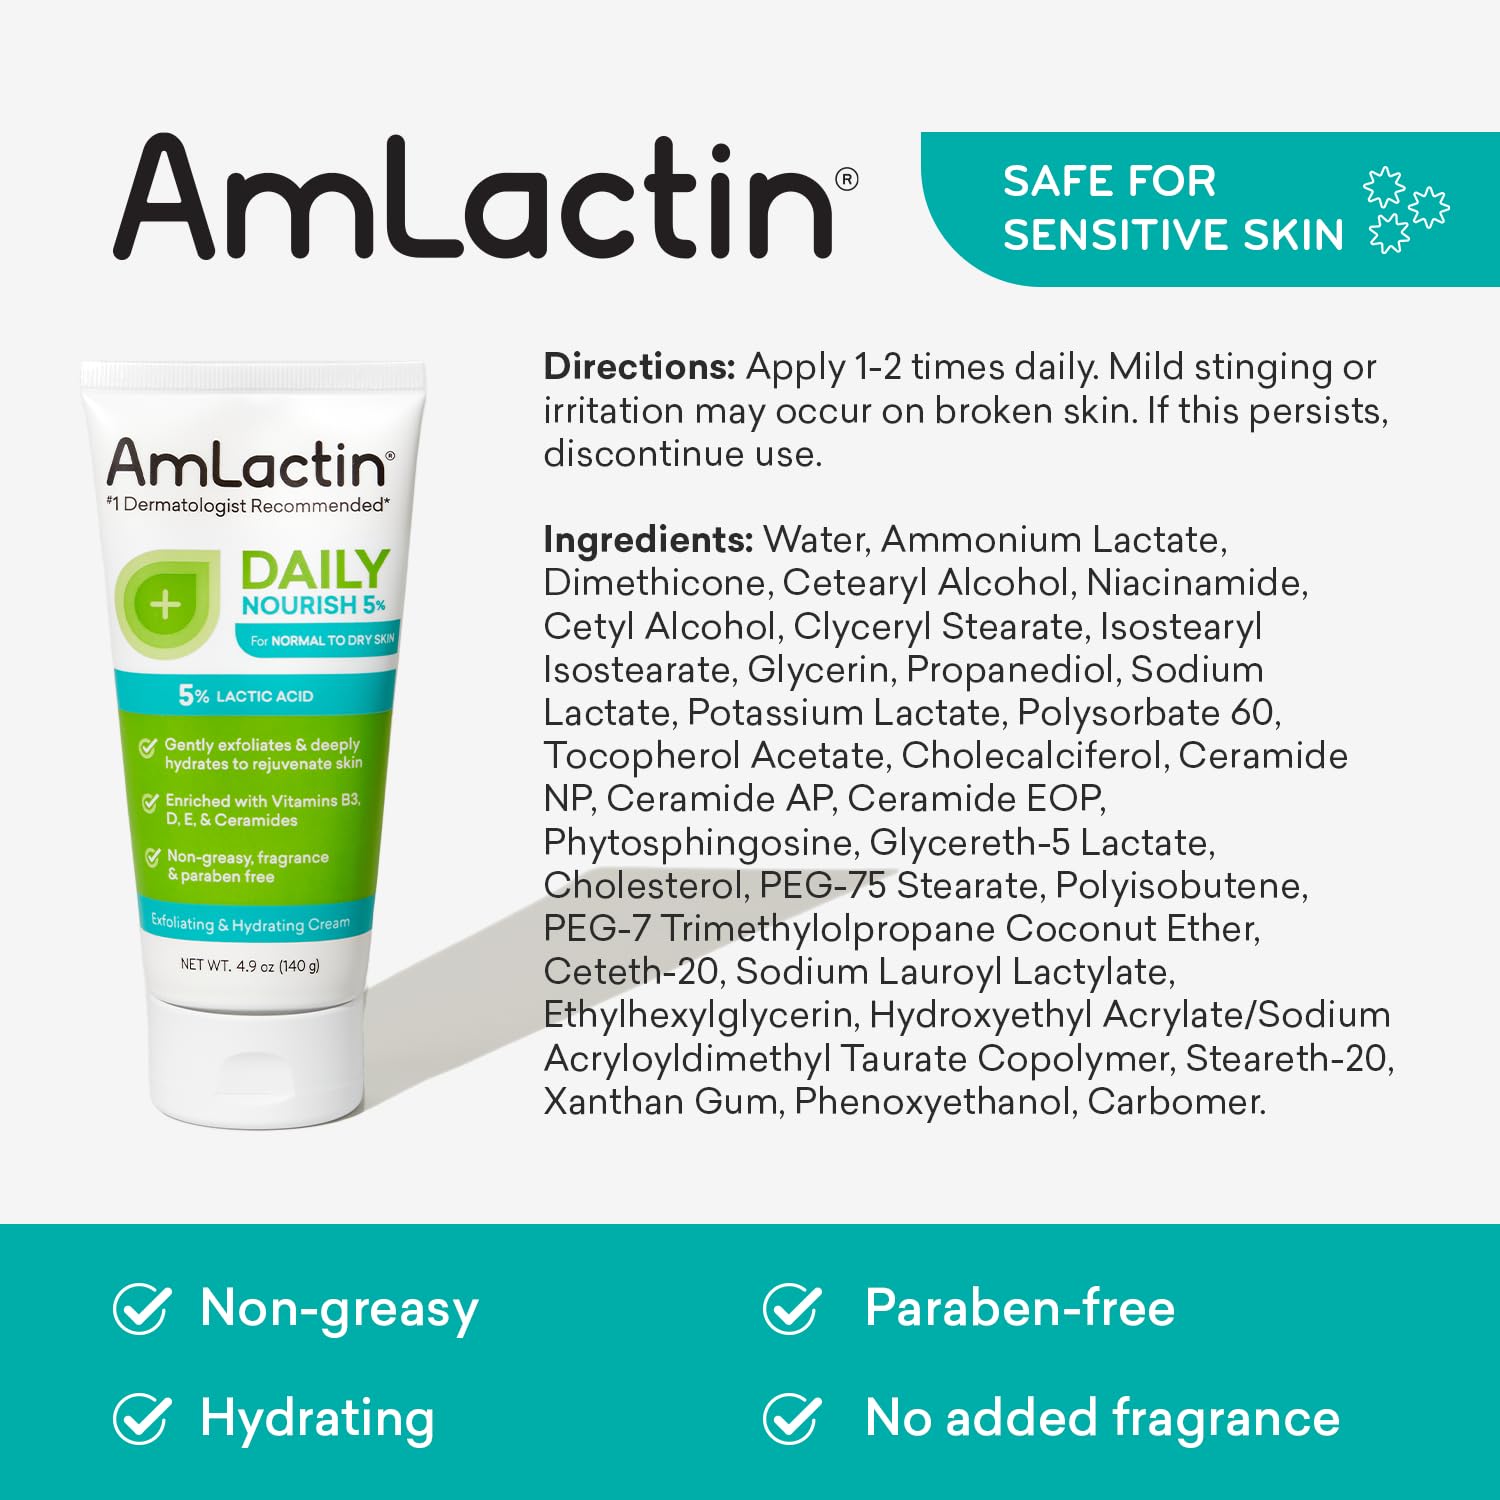 AmLactin Daily Nourish 5% - 4.9 oz Body Cream with 5% Lactic Acid - Exfoliator and Moisturizer for Dry Skin : Beauty & Personal Care